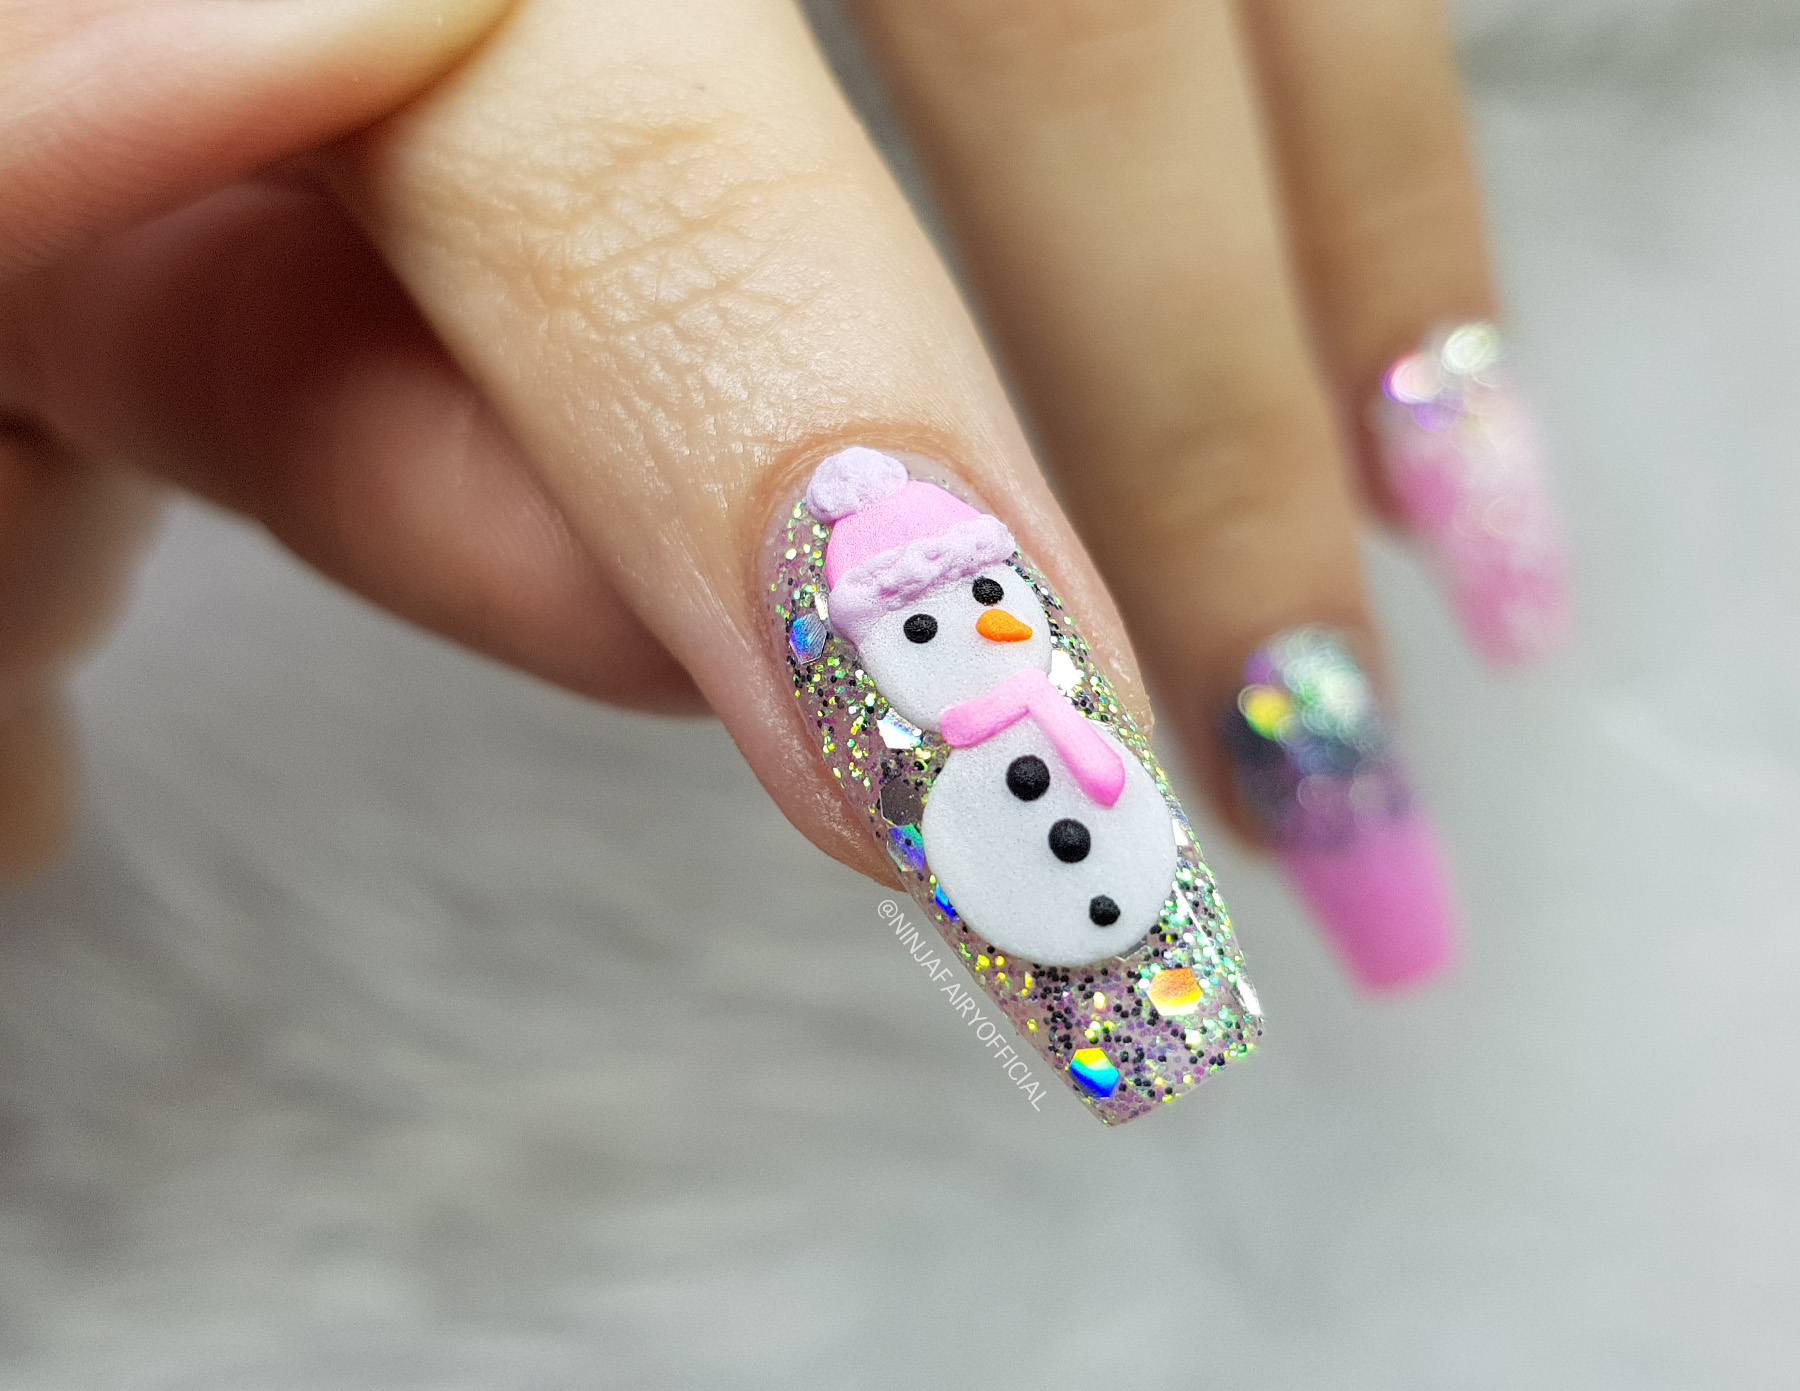 Acrylic nails - christmas glitter design with 3d nail art - YouTube